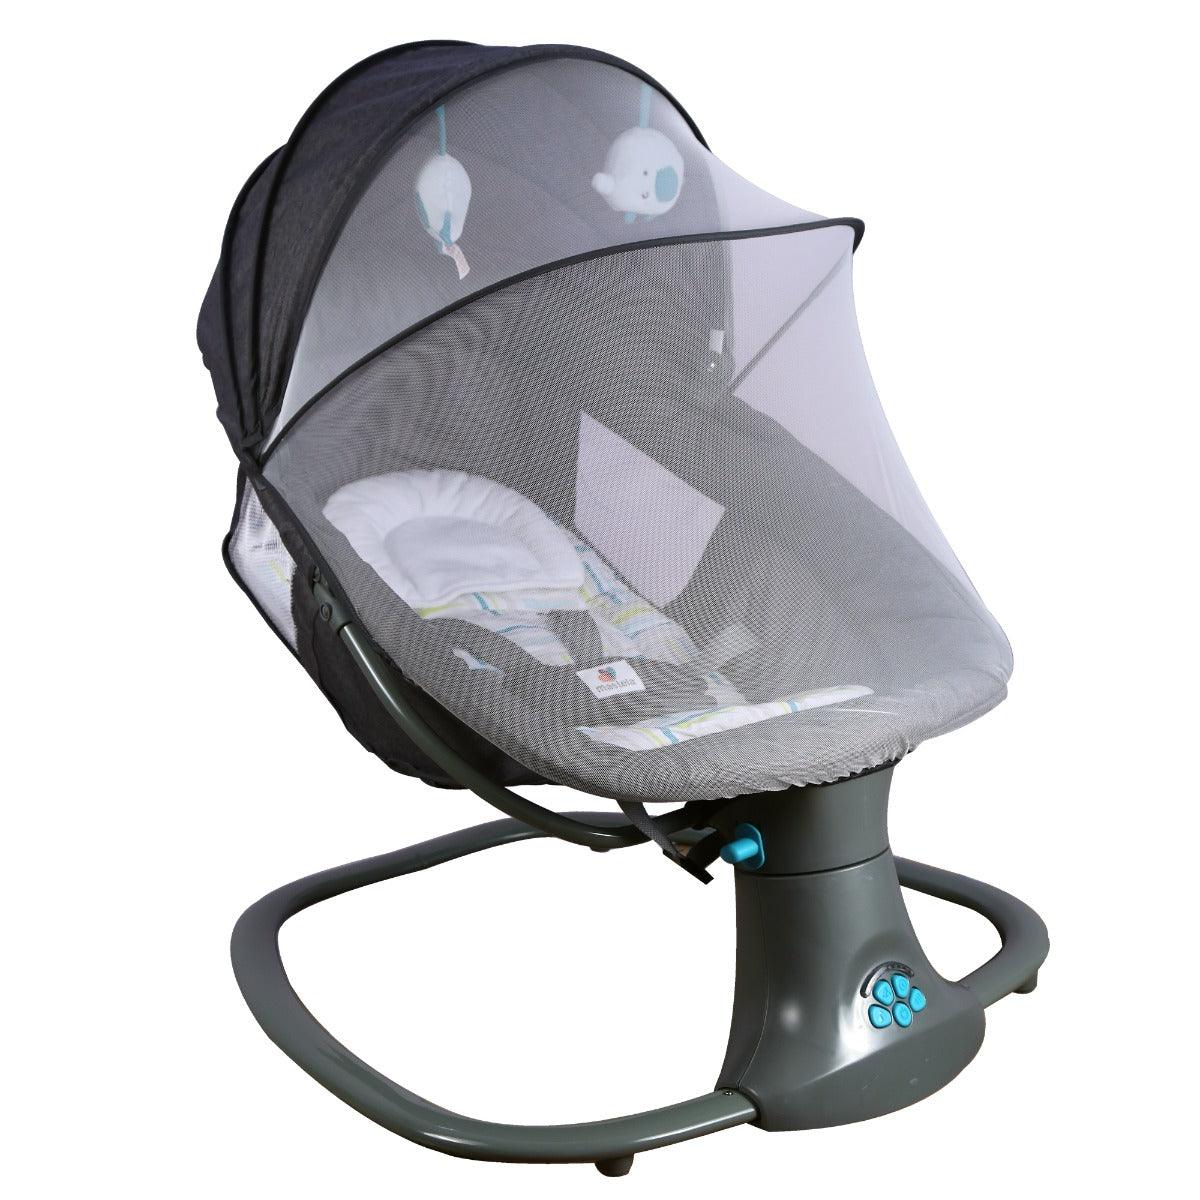 Mastela Deluxe Multi-Function Swing Teal - For Ages 0-3 Years